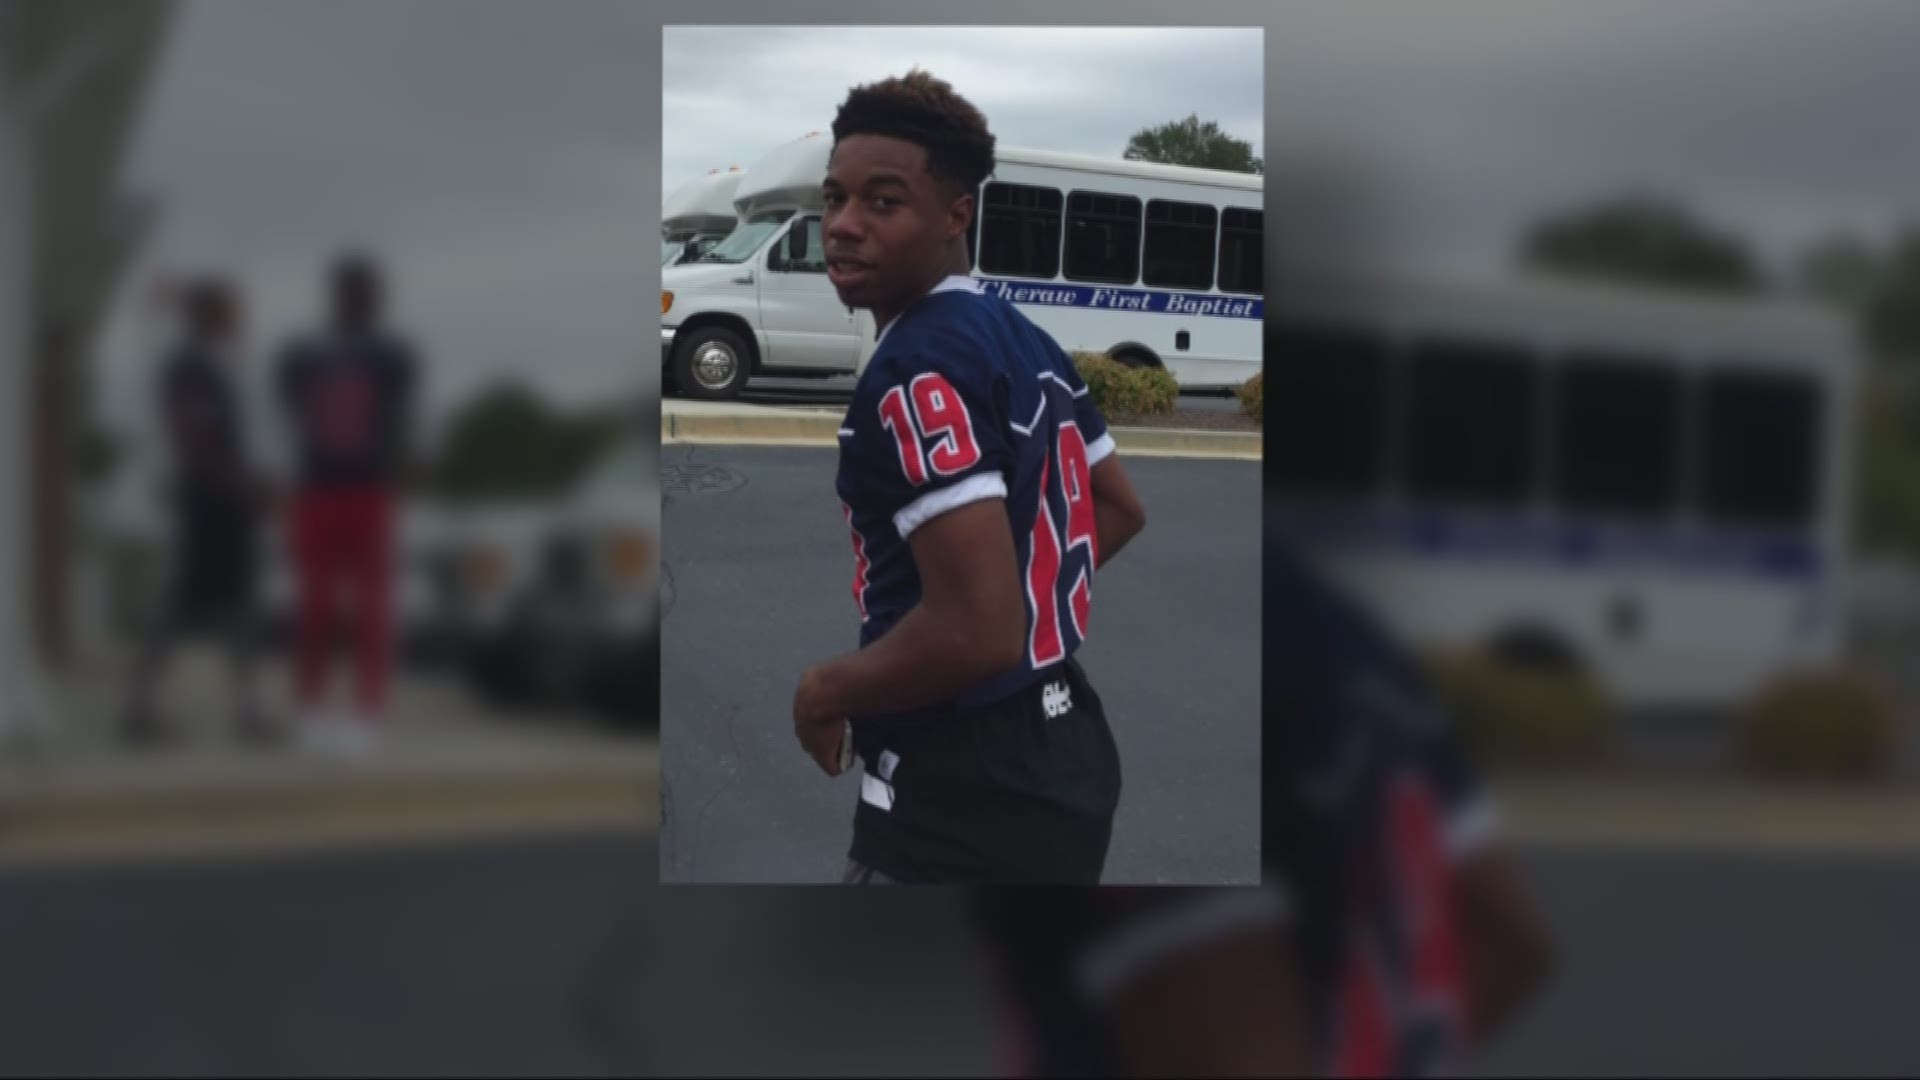 A community is in mourning after the sudden passing of a star football player.